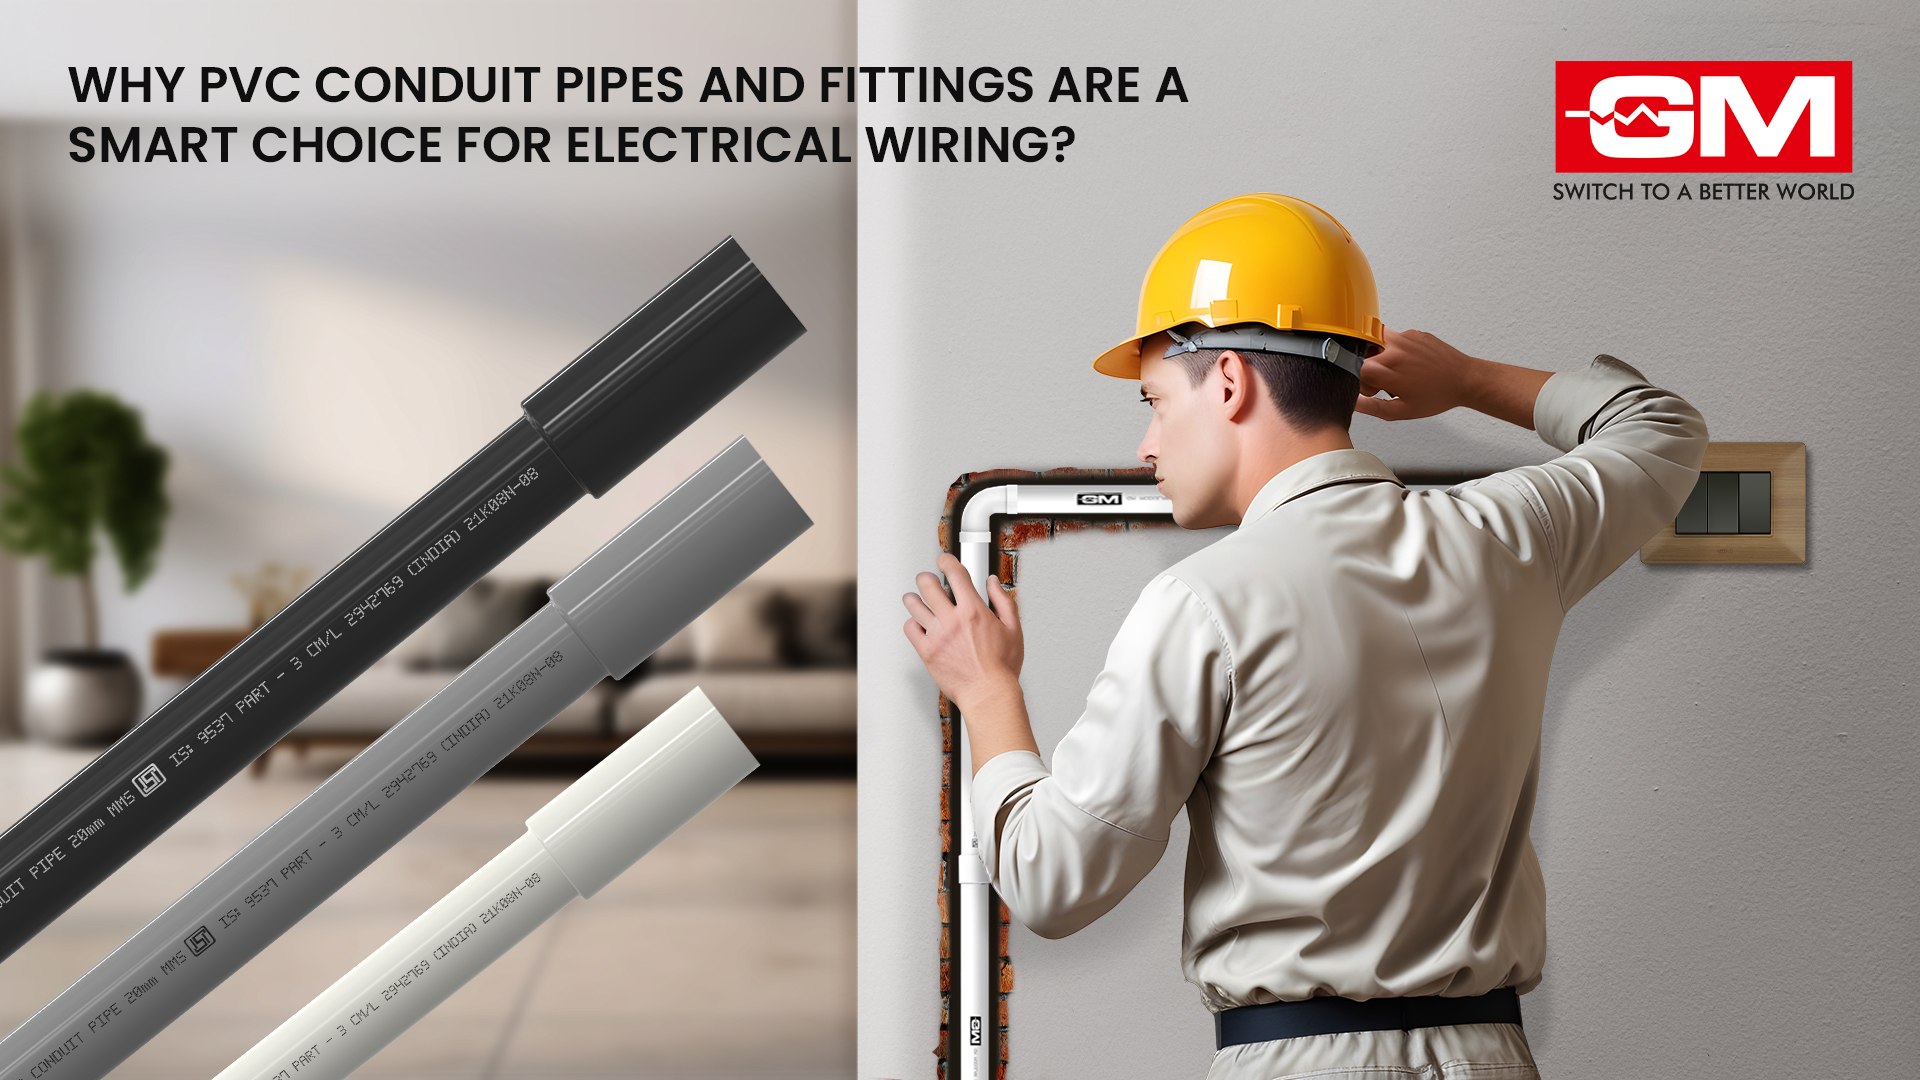 Why PVC Conduit Pipes and Fittings Are a Smart Choice for Electric Wiring